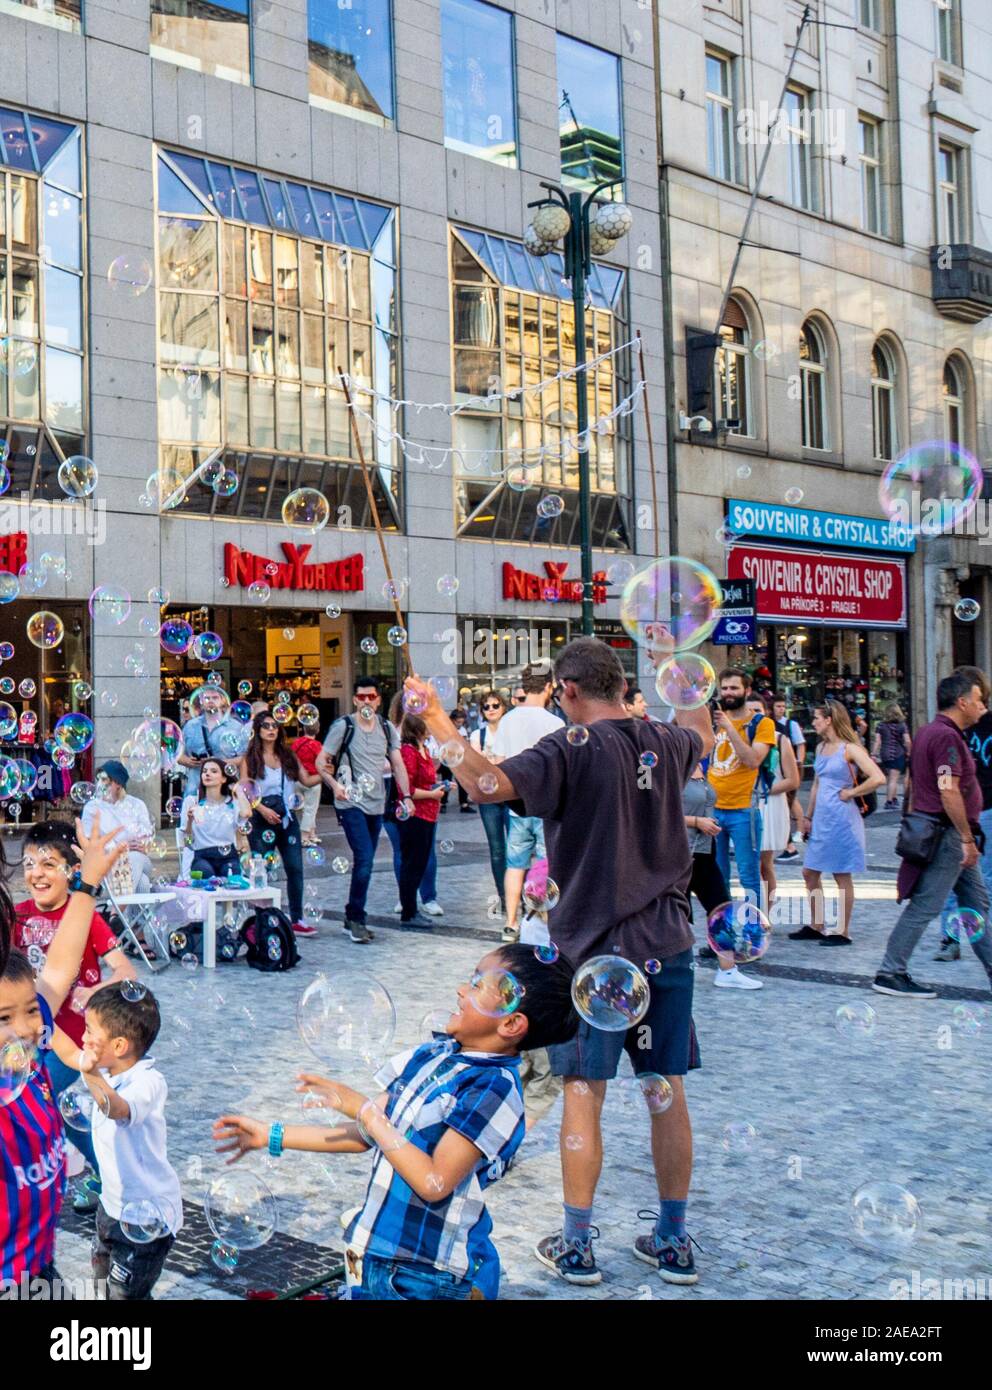 Man making bubbles and children attempting to catch the bubbles in Old Town Prague Czech Republic. Stock Photo